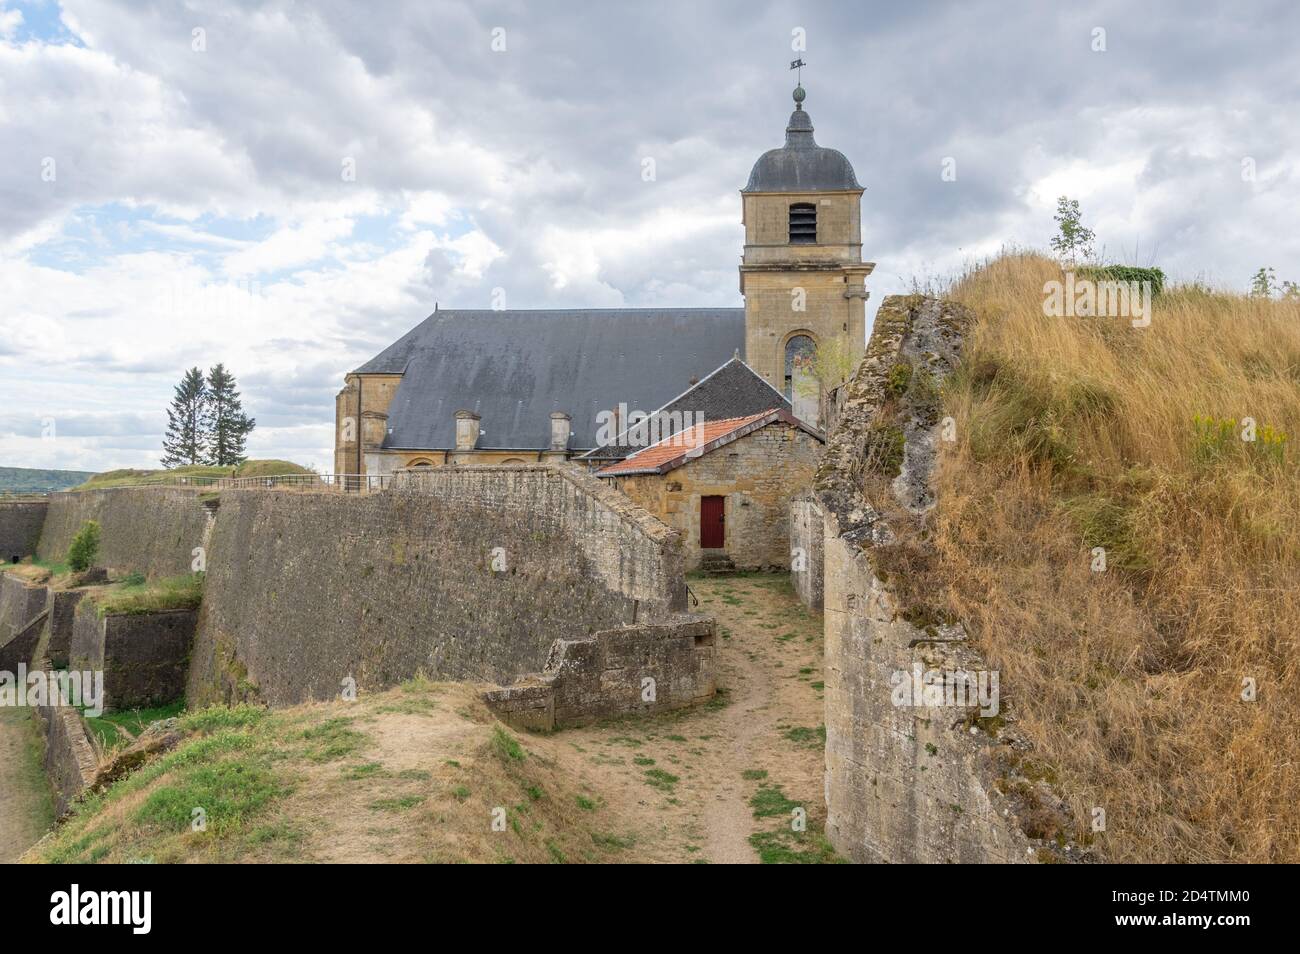 Fortifications and bastions of the Montmédy citadel / fort in the North-Eastern France, built in part by Vauban and well preserved Stock Photo